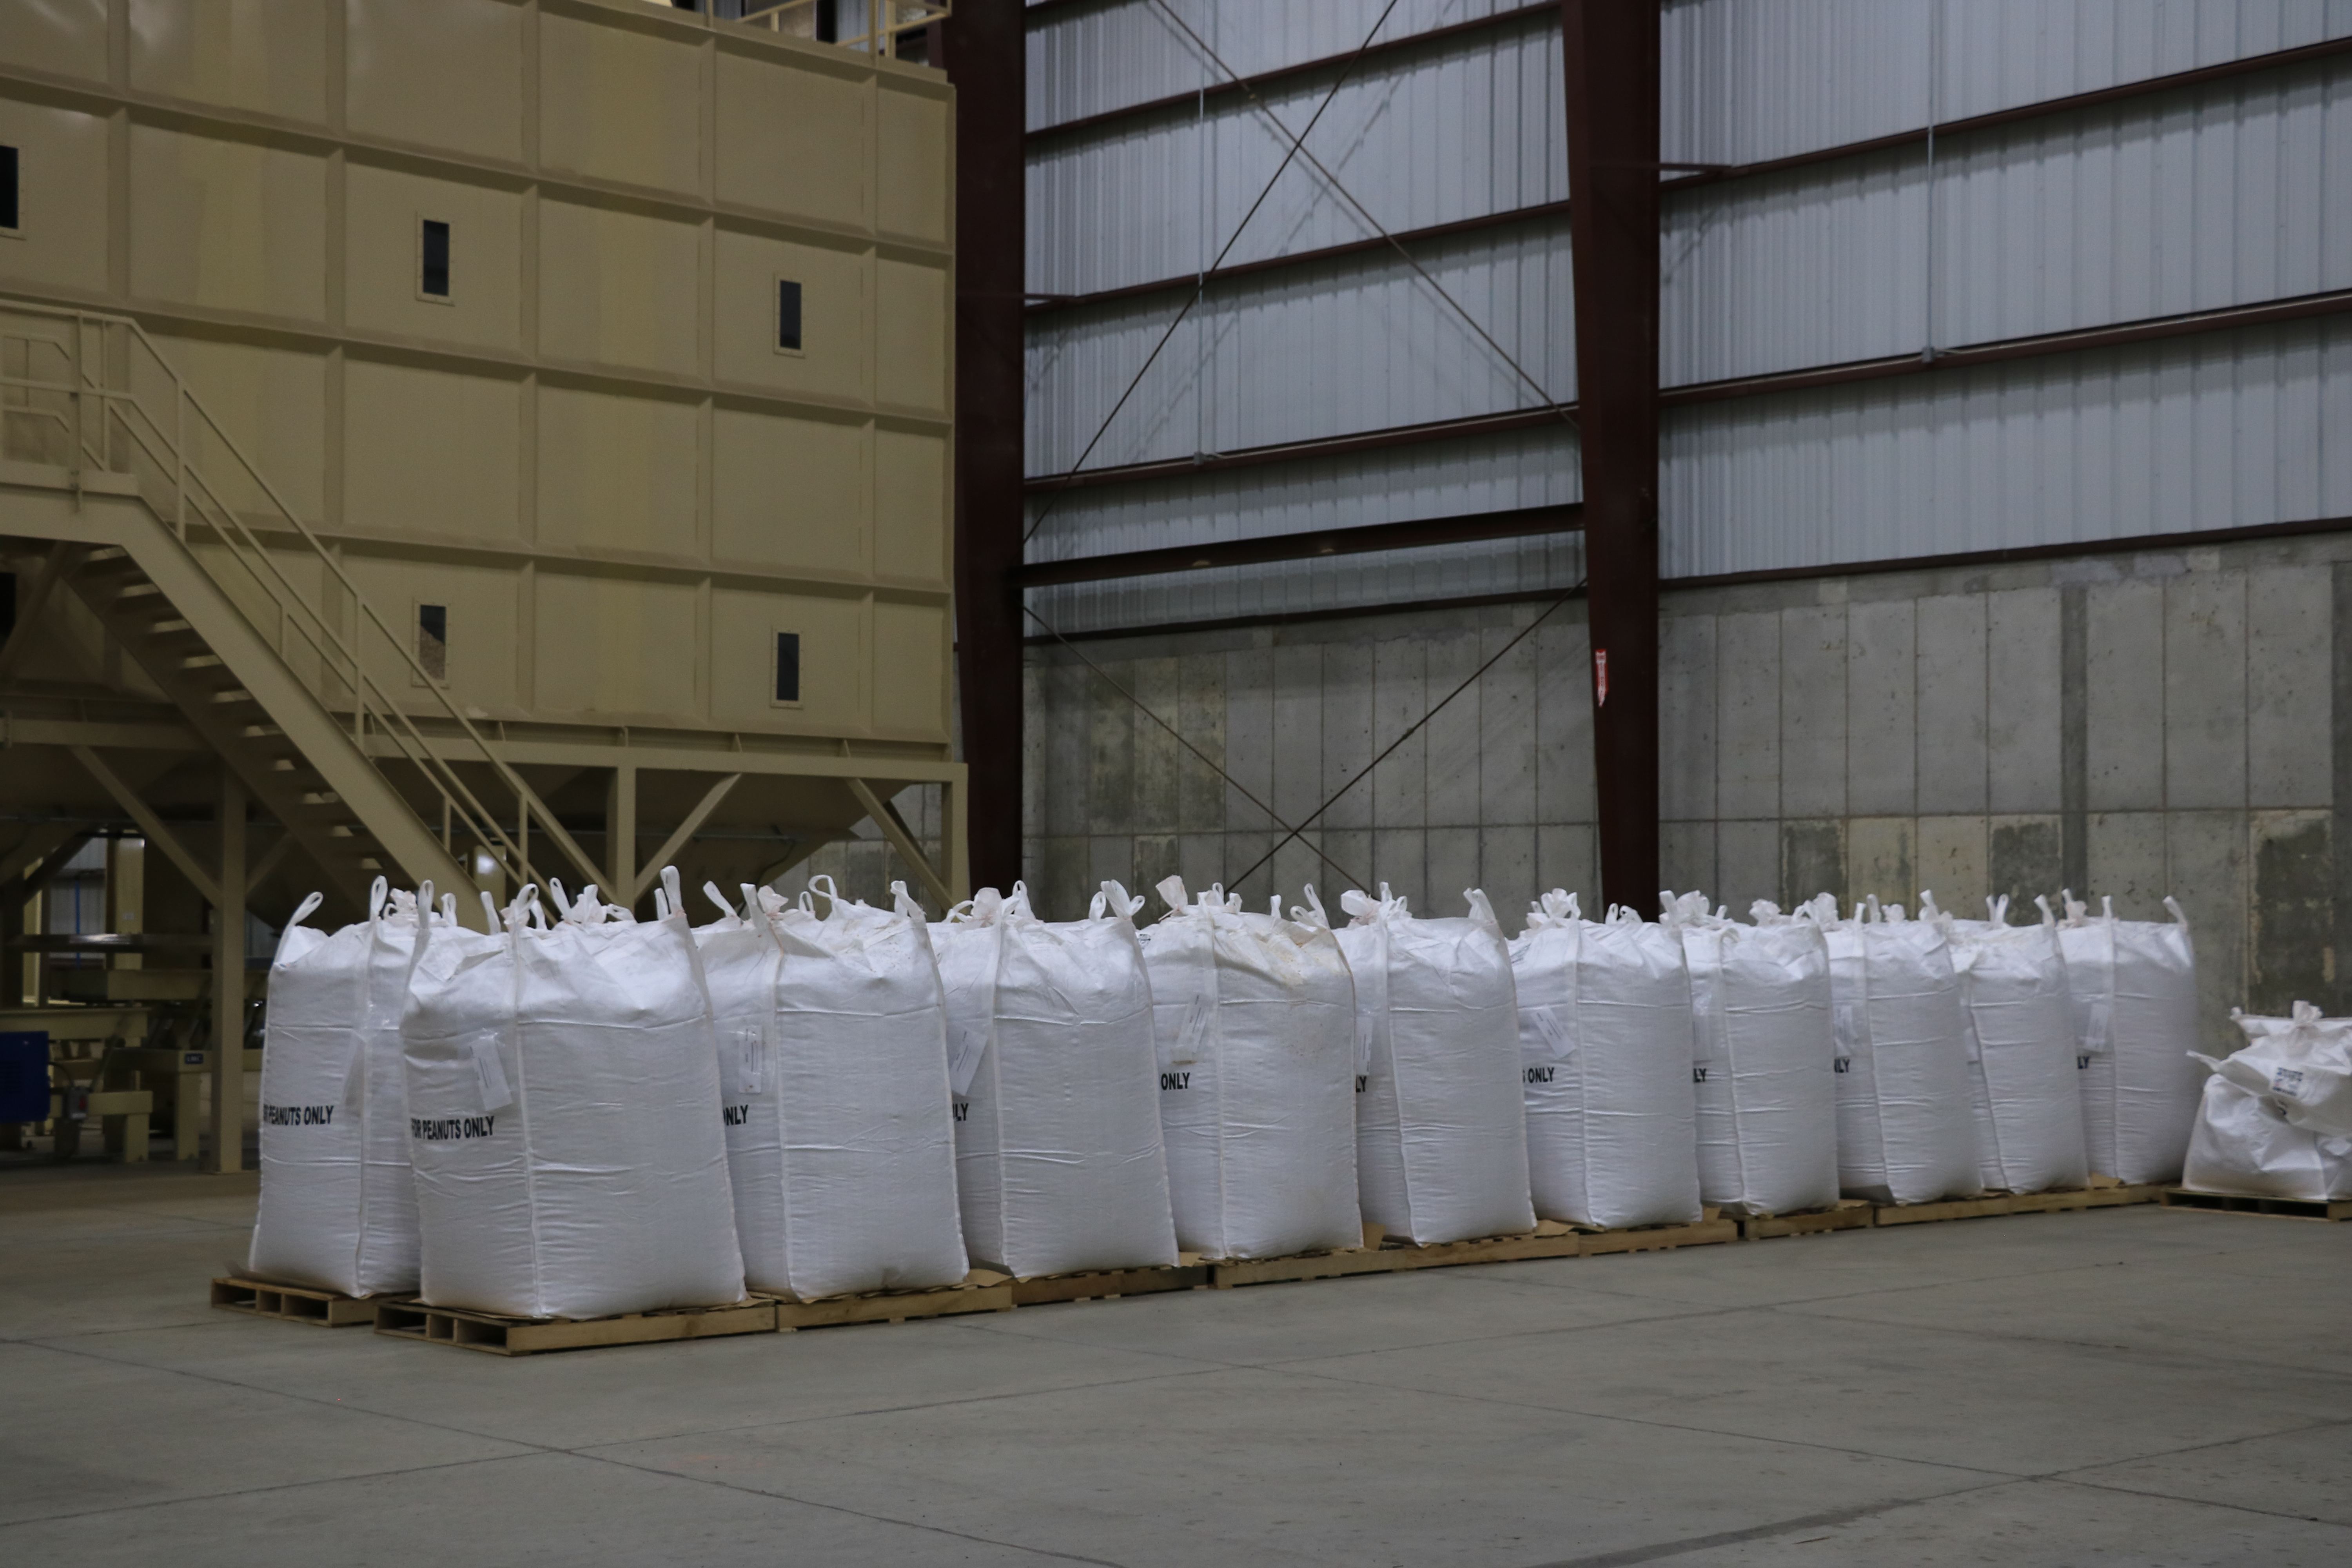 The final step is to bag the shelled peanuts to move to other facilities across the country.